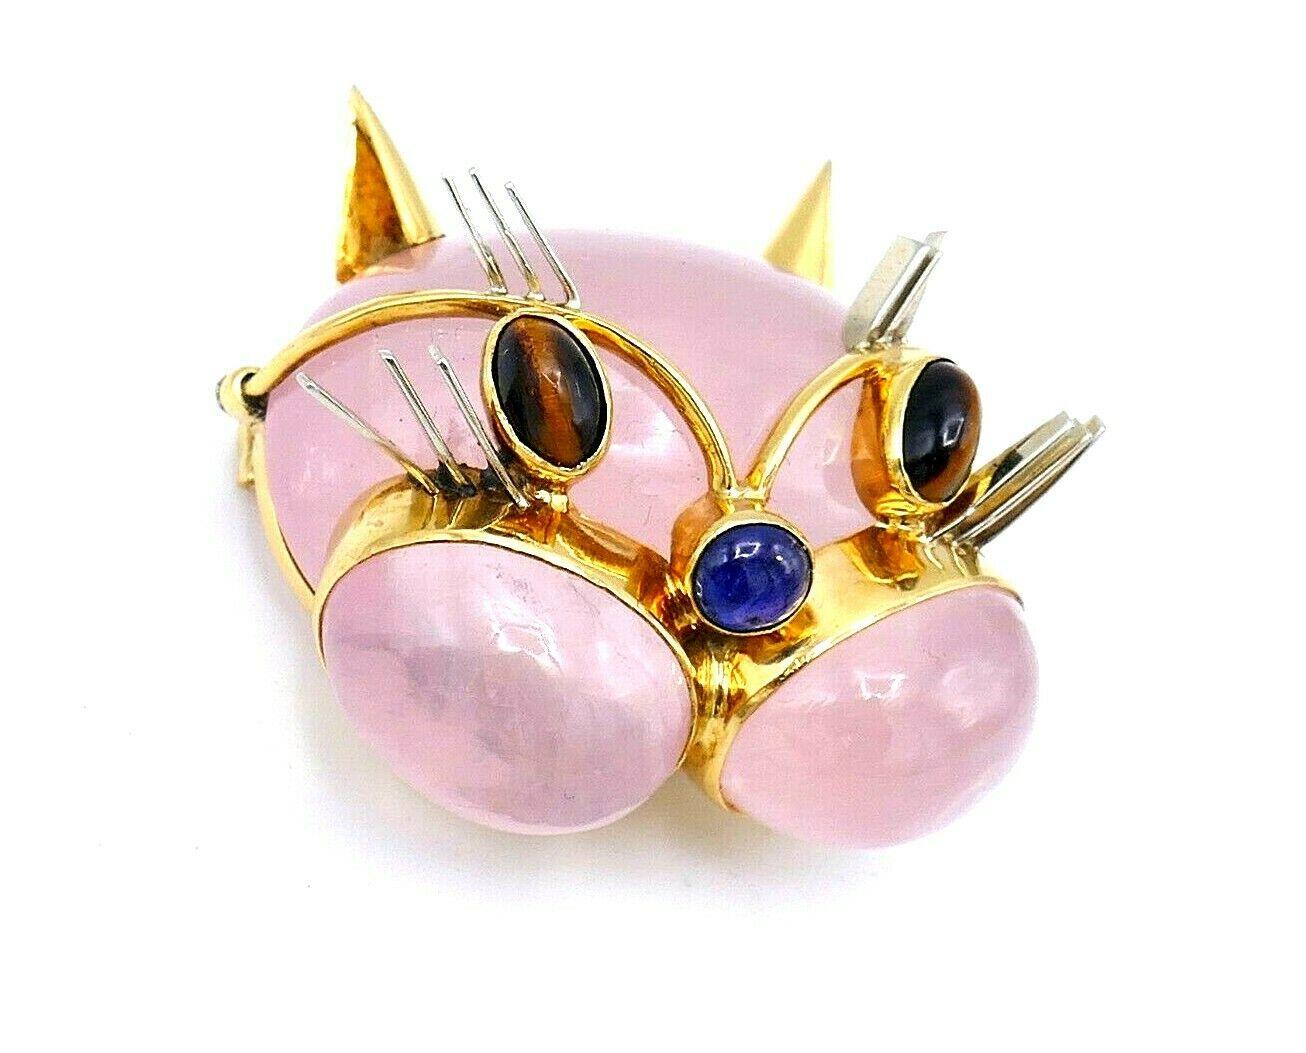 Cute vintage Cat Face brooch by Tiffany & Co. made of pink quartz and 18k yellow gold. Features tiger's eye, sapphire and white gold. Stamped with Tiffany & Co. maker's mark, hallmark for 18k gold and a country of origin (Italy).
Measurements:  1